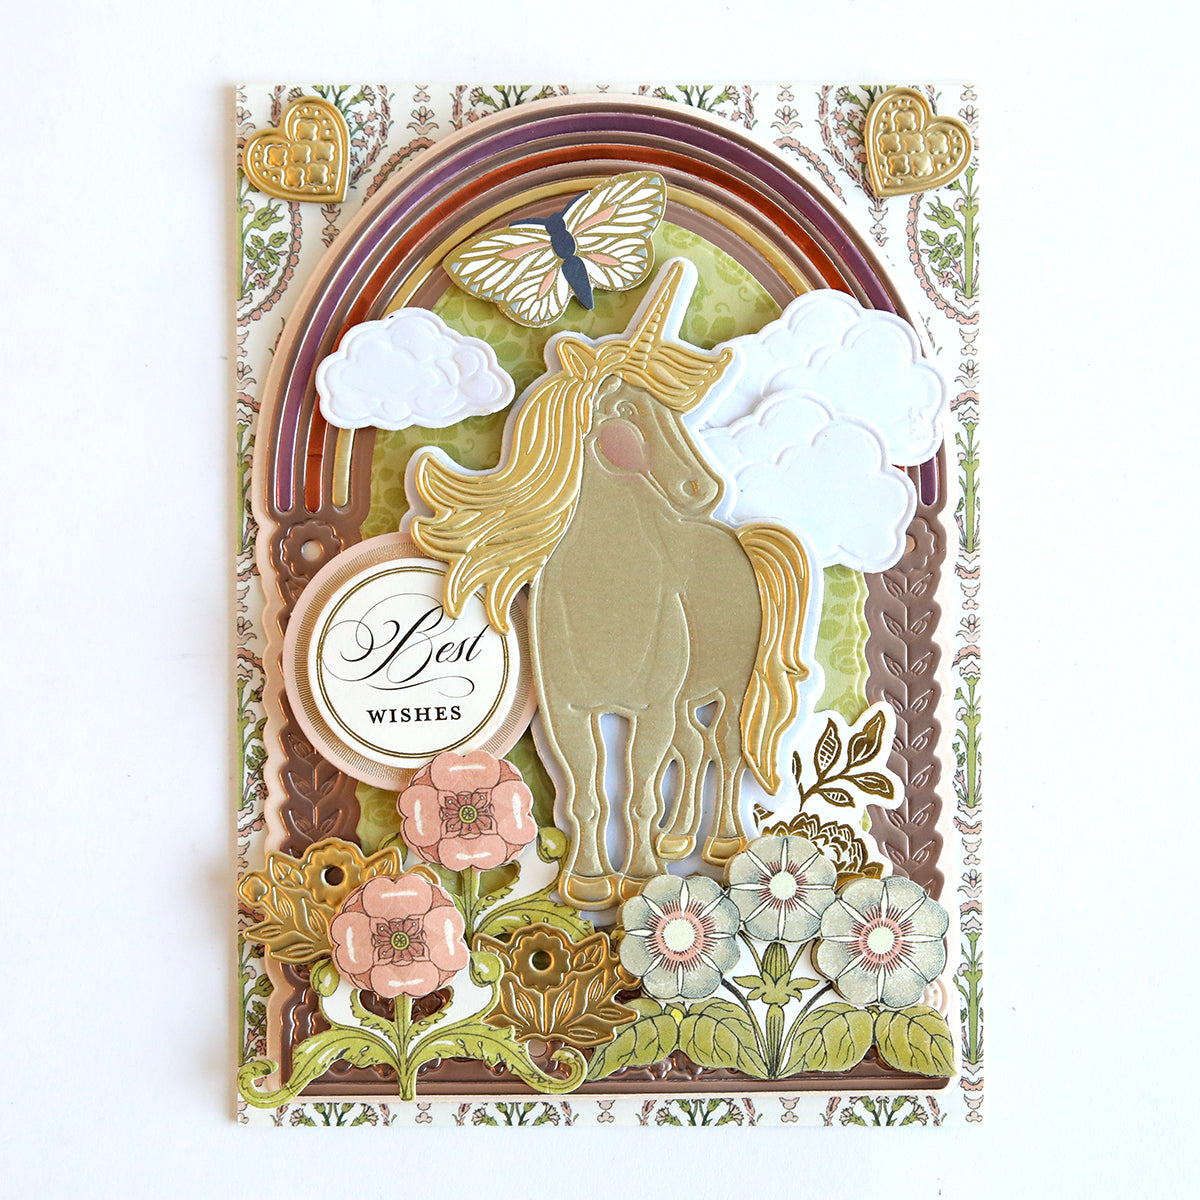 A handmade greeting card featuring a 3D Unicorn Scene Dies with unicorns, clouds, flowers, and the words "best wishes".